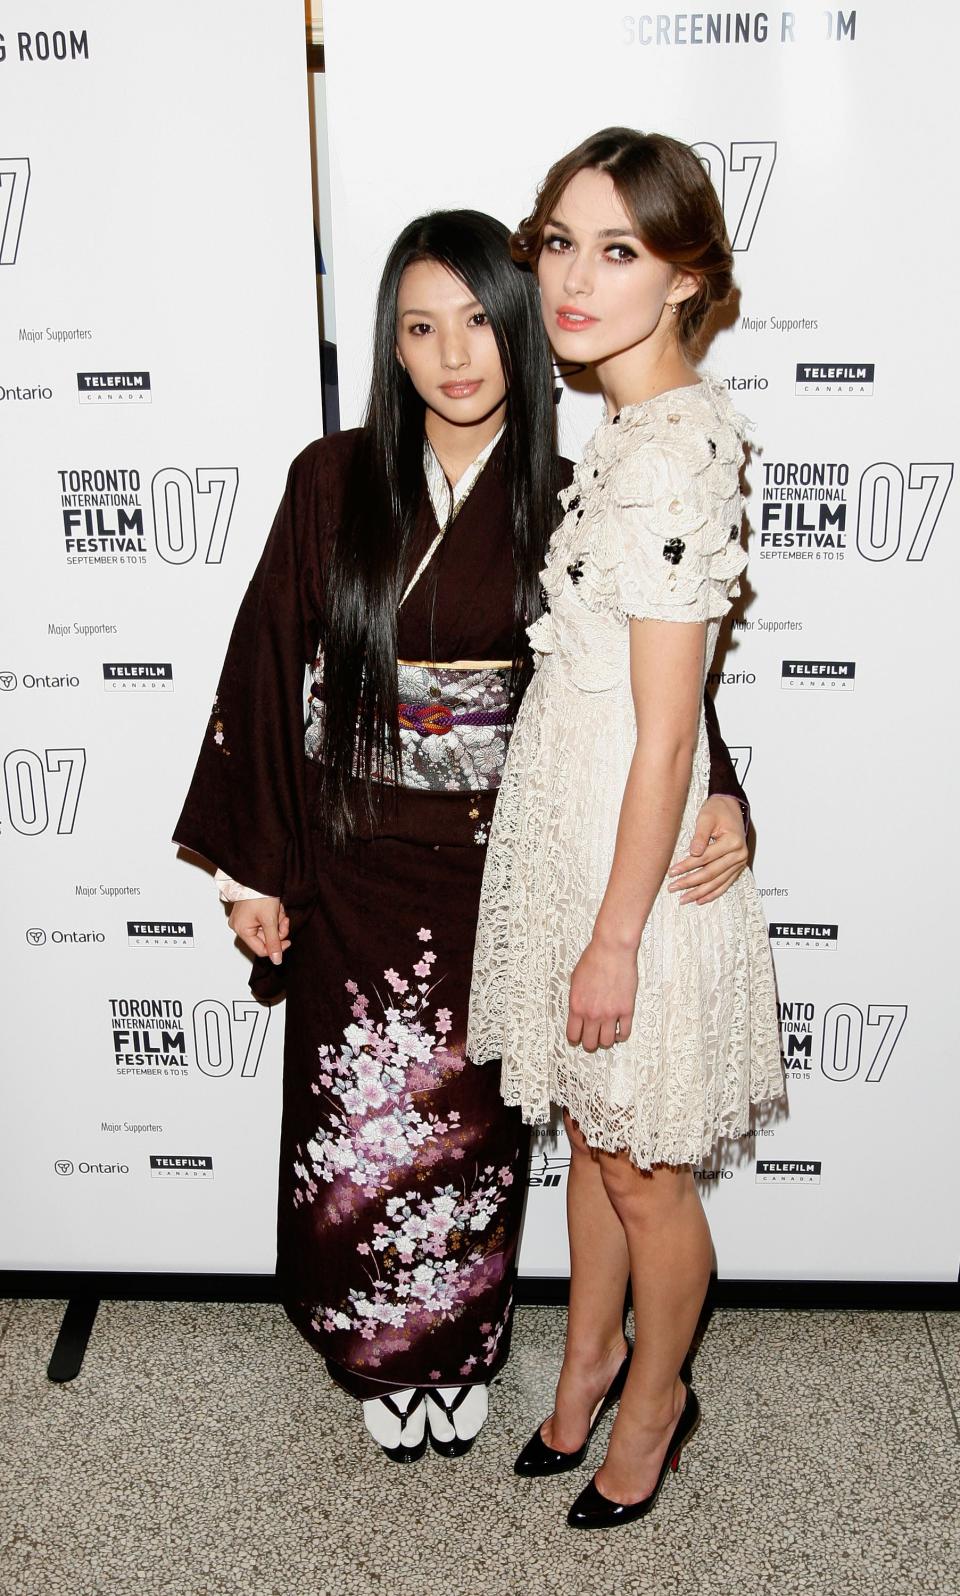 TORONTO, ON - SEPTEMBER 11: Actress Sei Ashina (L) and actress Keira Knightley arrive at the "Silk" Premiere screening during the Toronto International Film Festival 2007 held at the Elgin Theatre on September 11, 2007 in Toronto, Canada. (Photo by Malcolm Taylor/Getty Images)